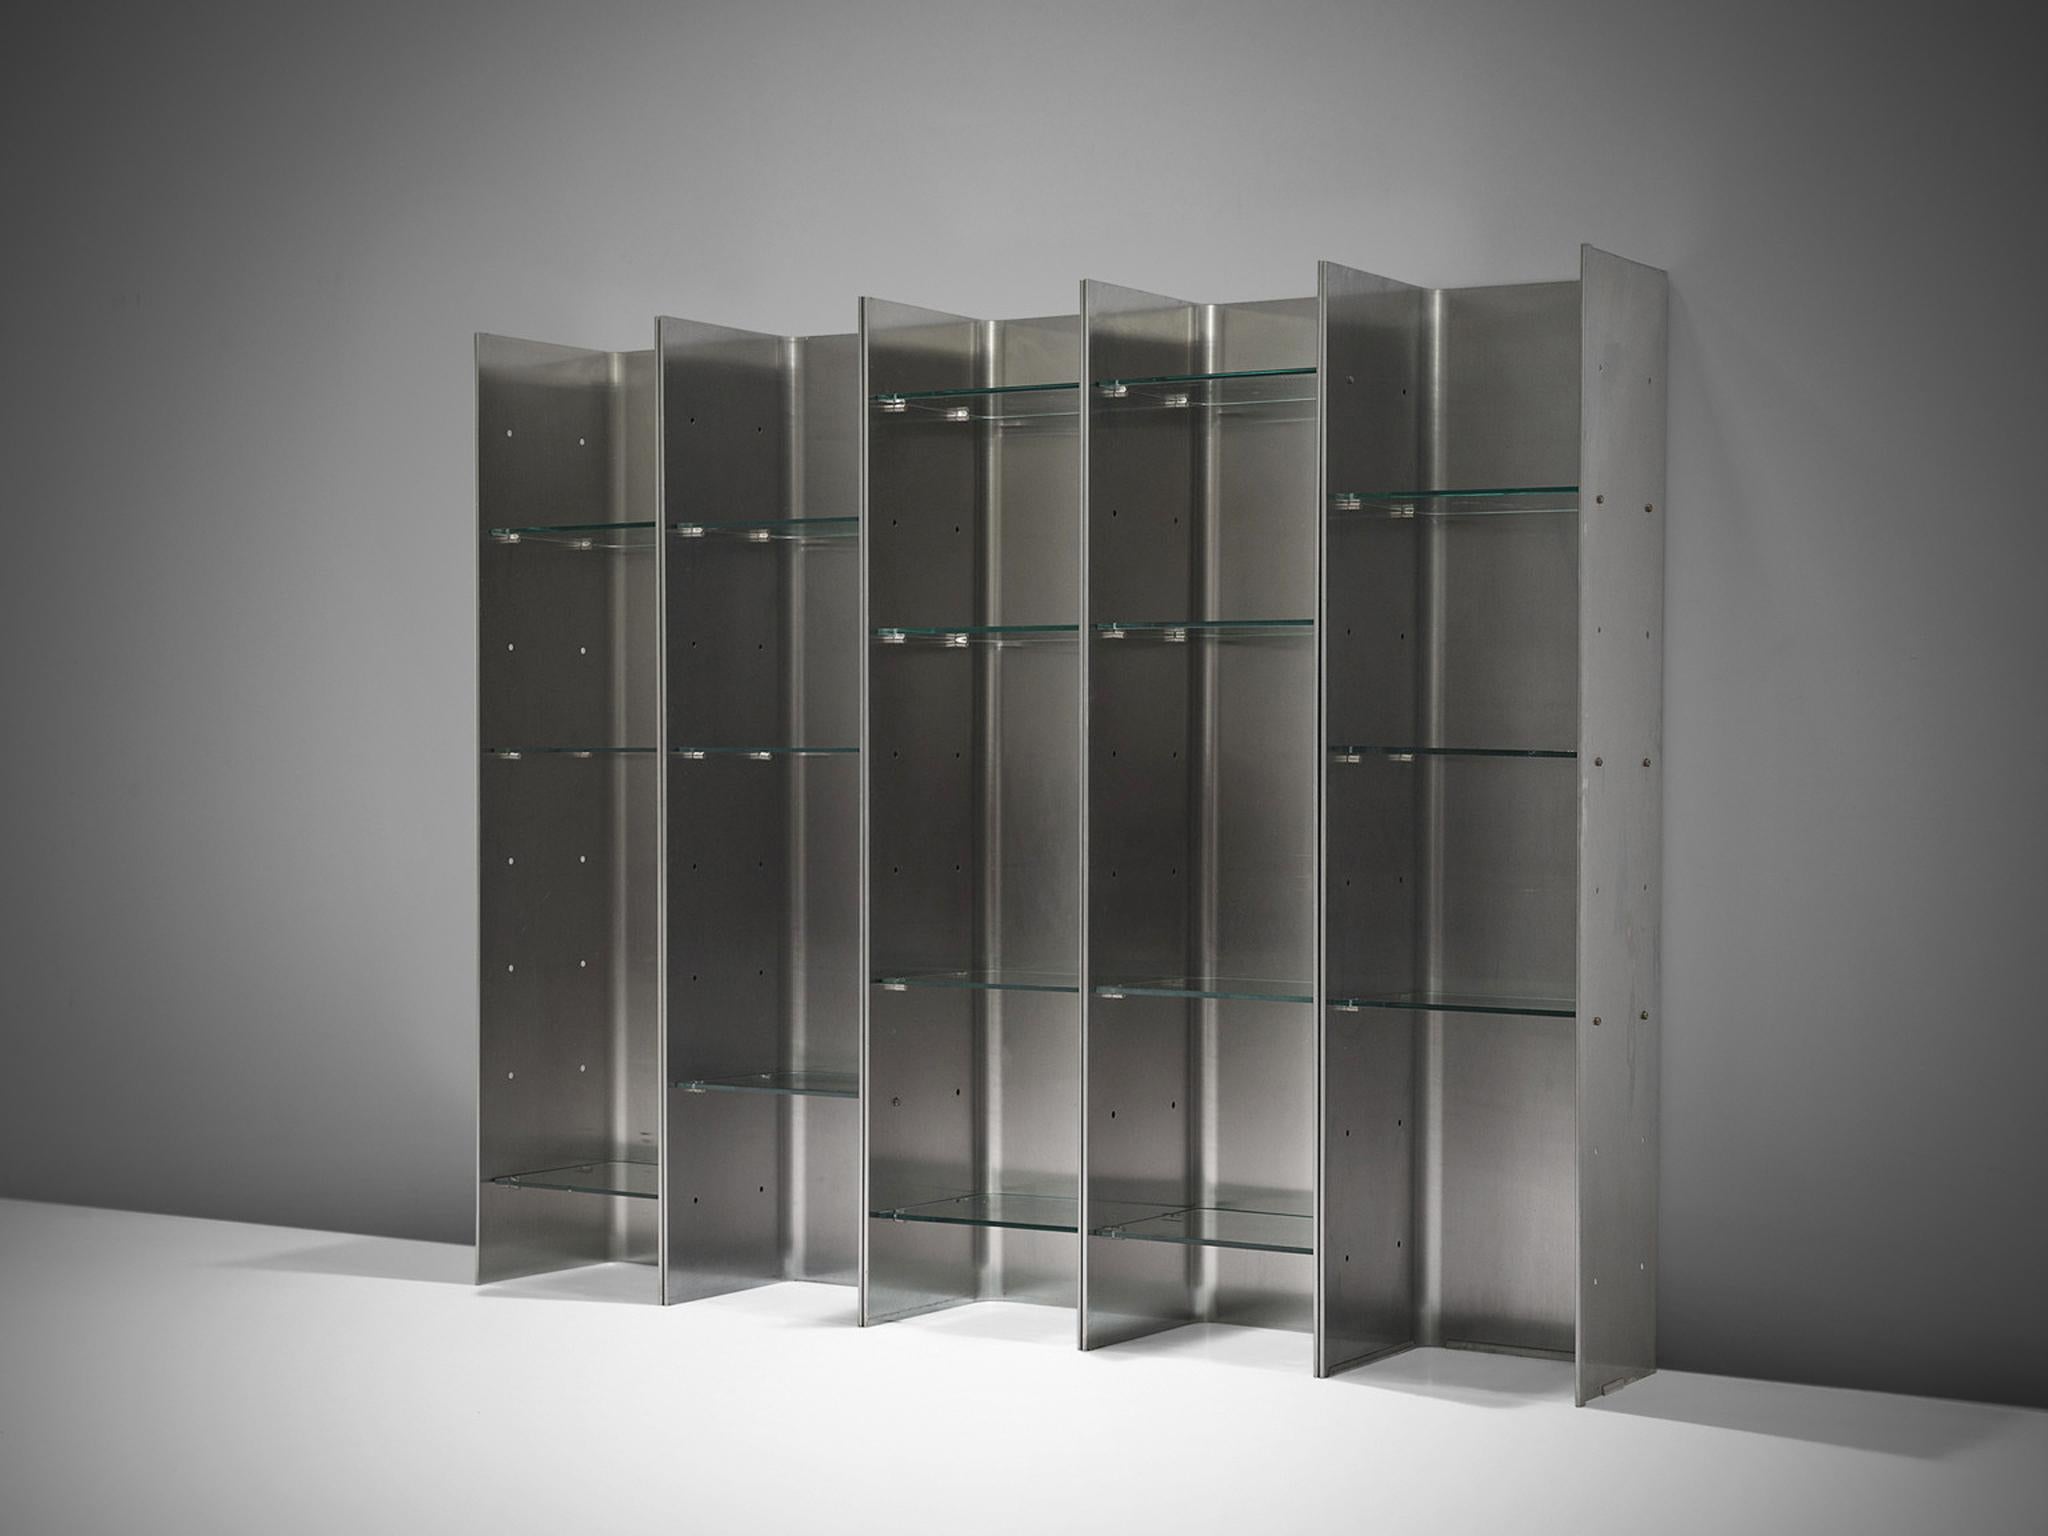 Bookcase by Carla Venosta & Guido Zimmerman for Arflex, metal, plexiglas, Italy, 1970s

This steel bookcase with plexiglas shelves has a clean and geometric design which is emphasized by the rawness of the materials. This particular unit consists of